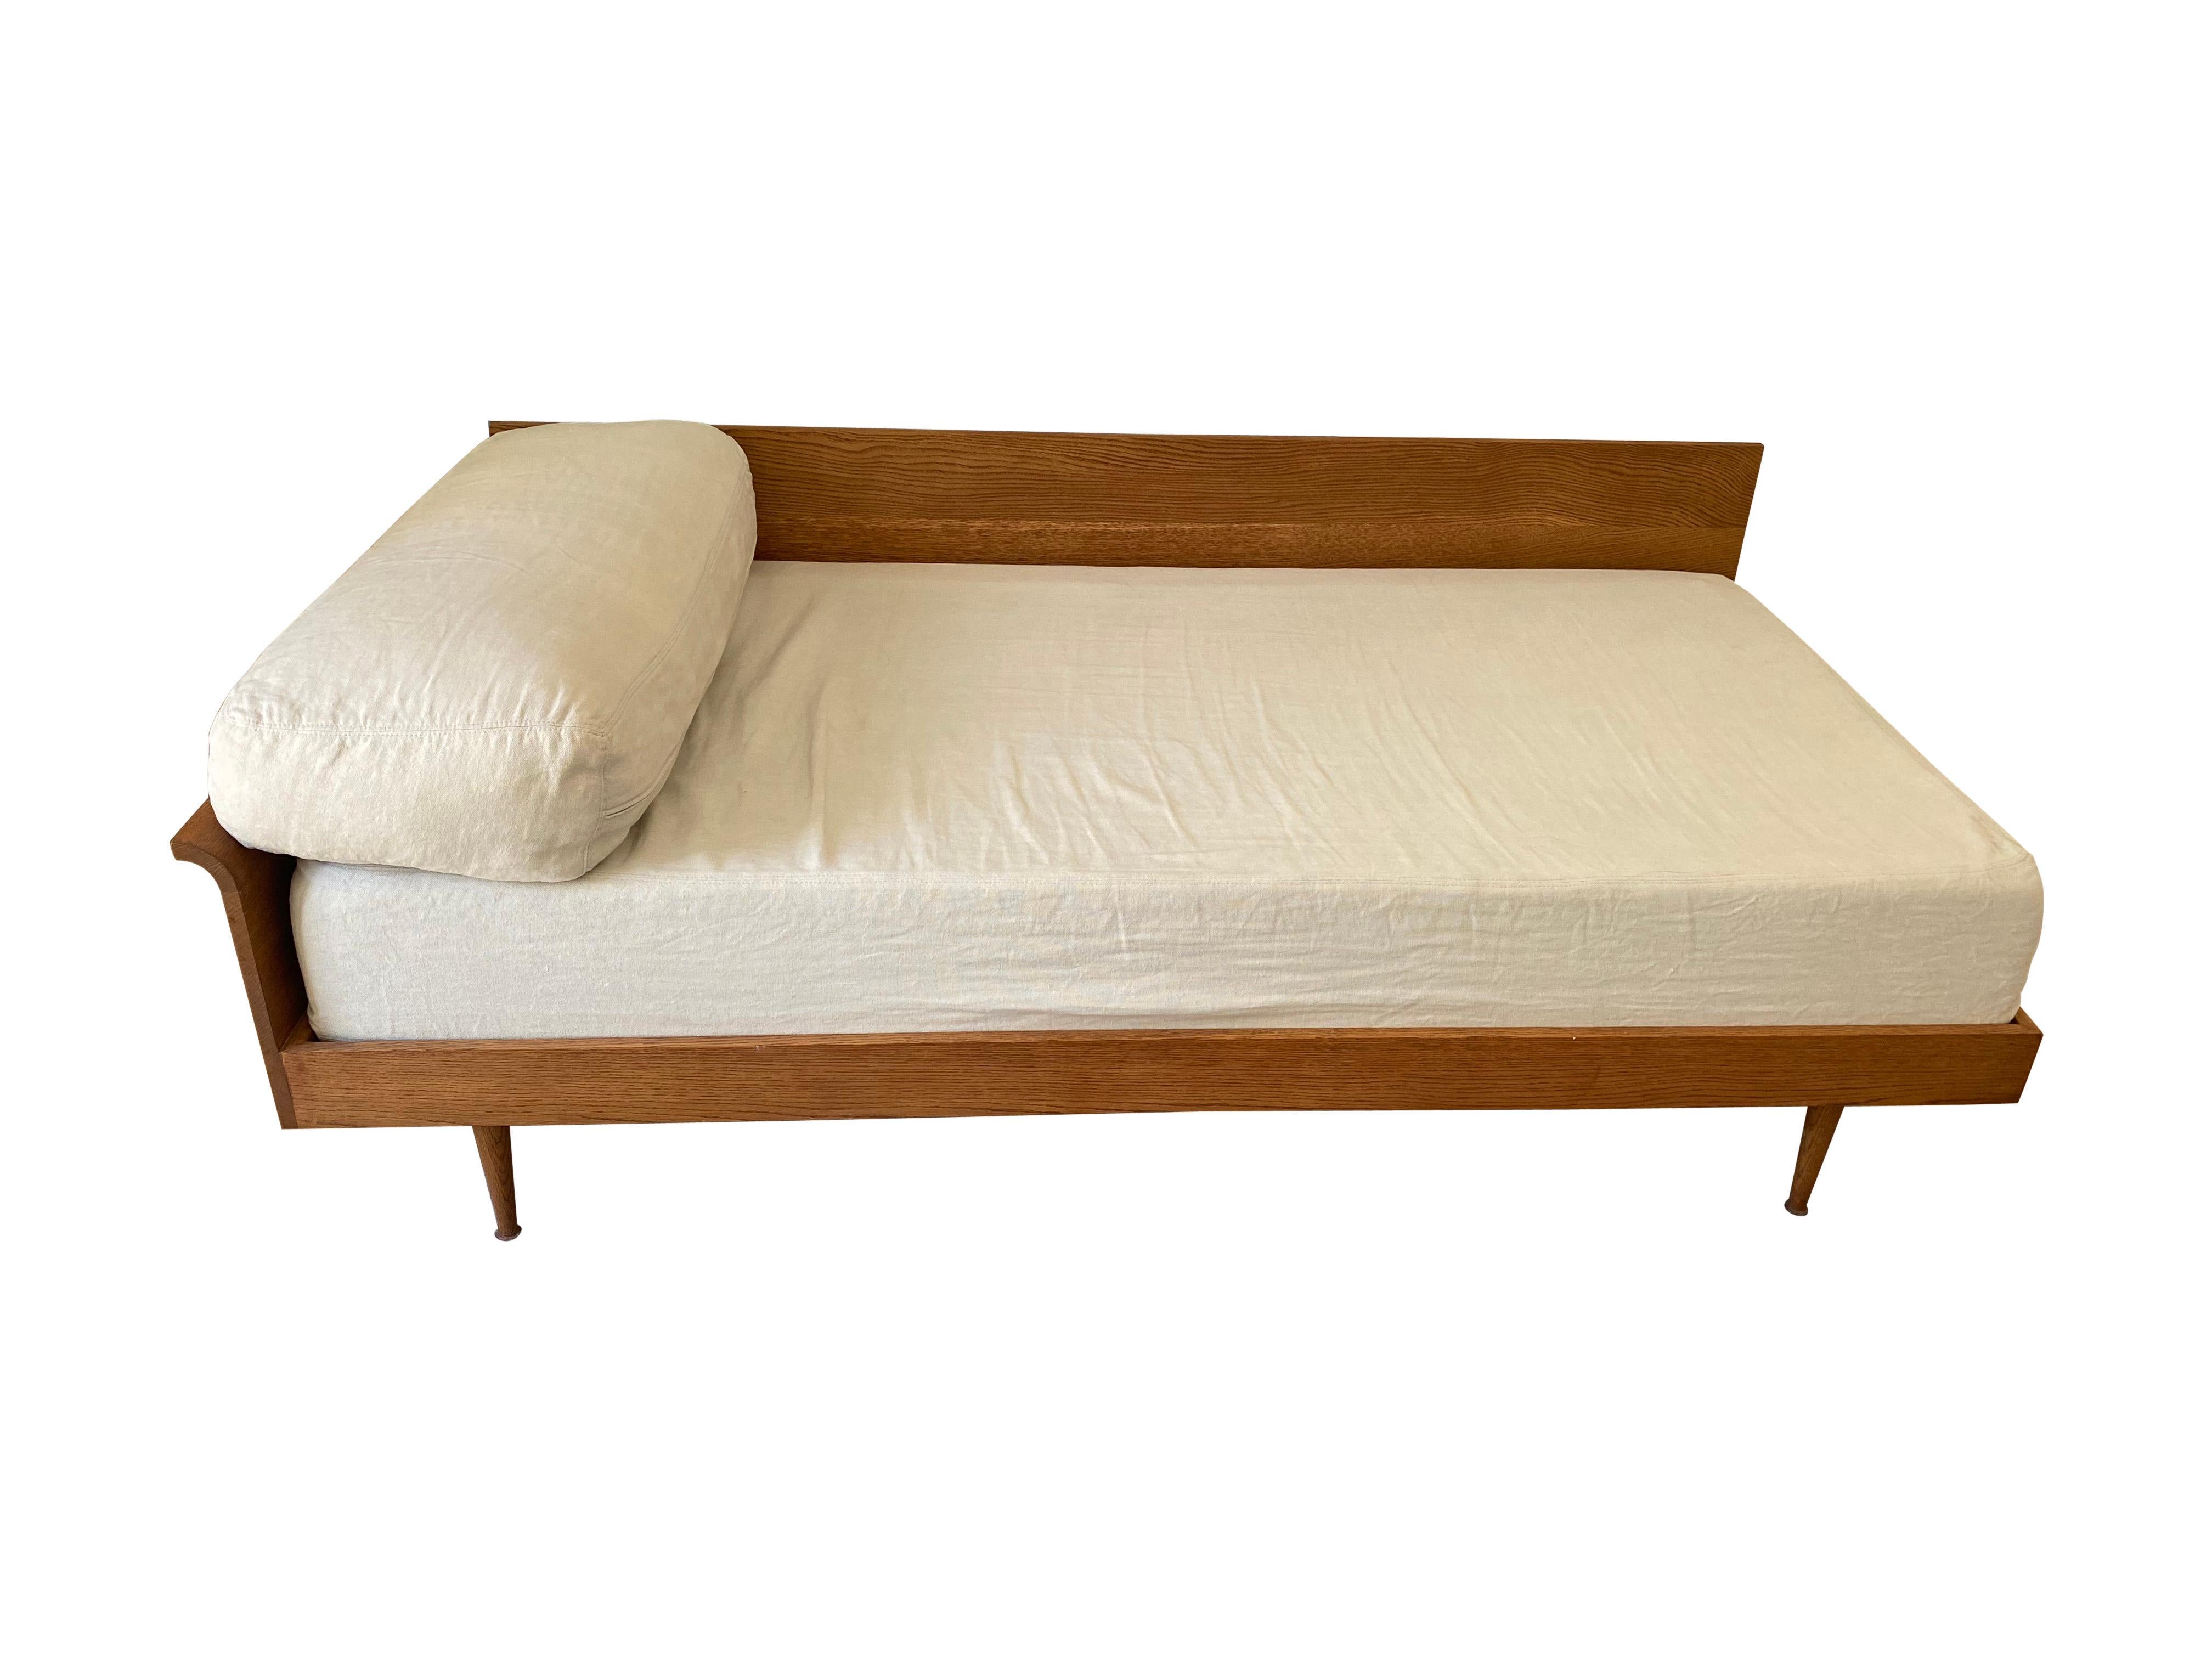 Beautiful custom hand made, Oak daybed with full XL cushion and two header pillows. Inspired by Swedish mid century modern designs. Ideal addition for a living room, guest bedroom or dressing room. Clean and simple design so perfect for minimalist